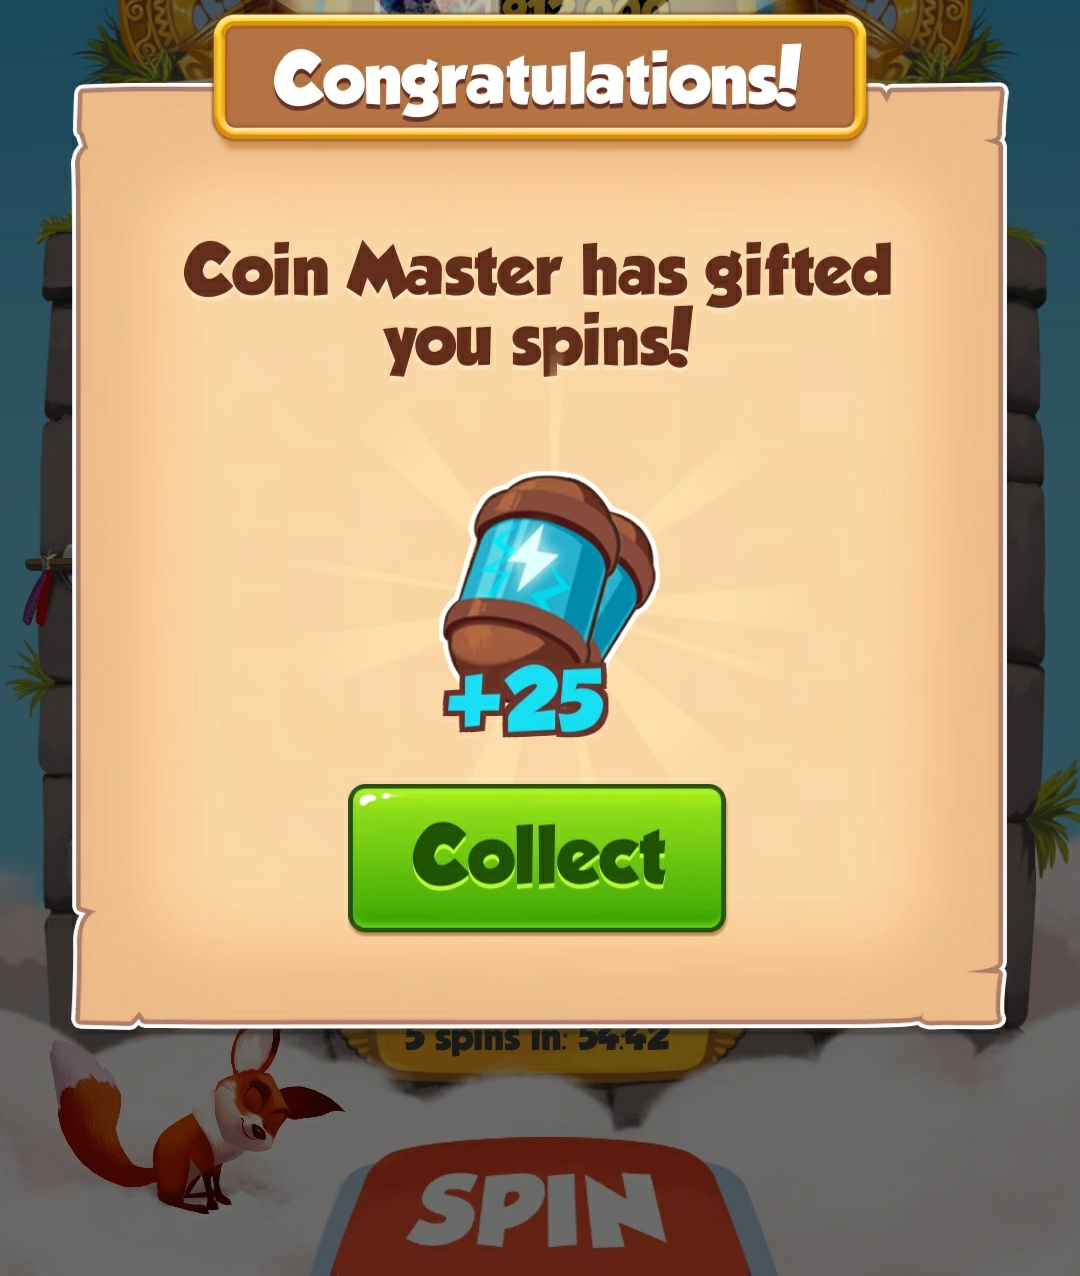 Free spins for coin master app